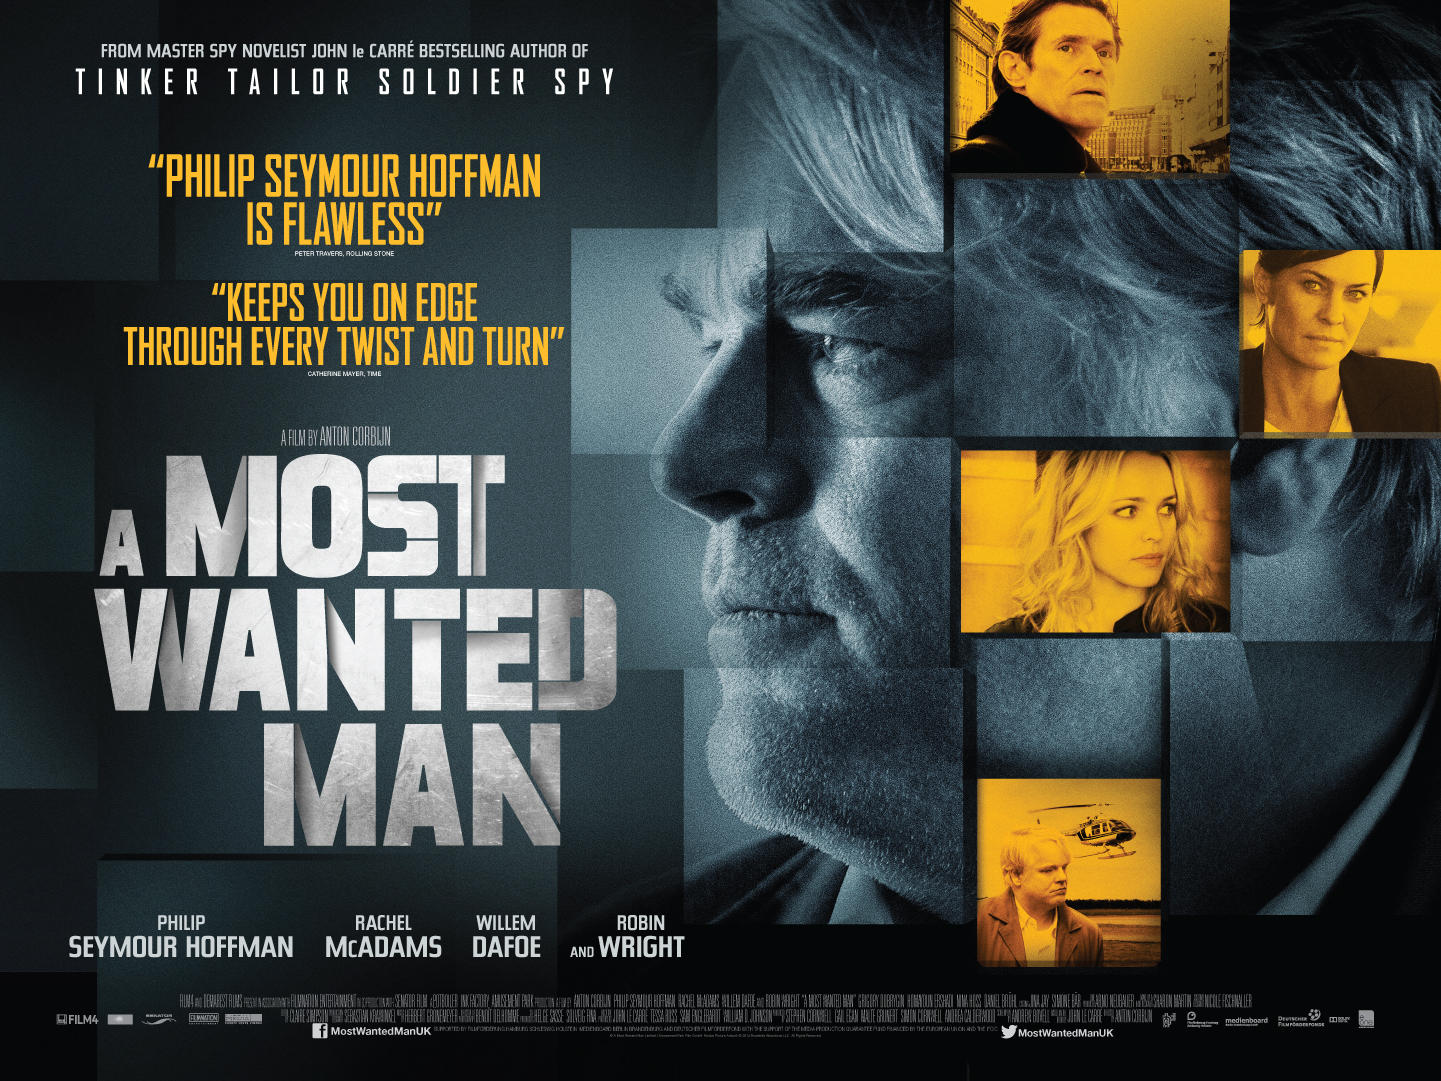 a-most-wanted-man-poster3.jpg